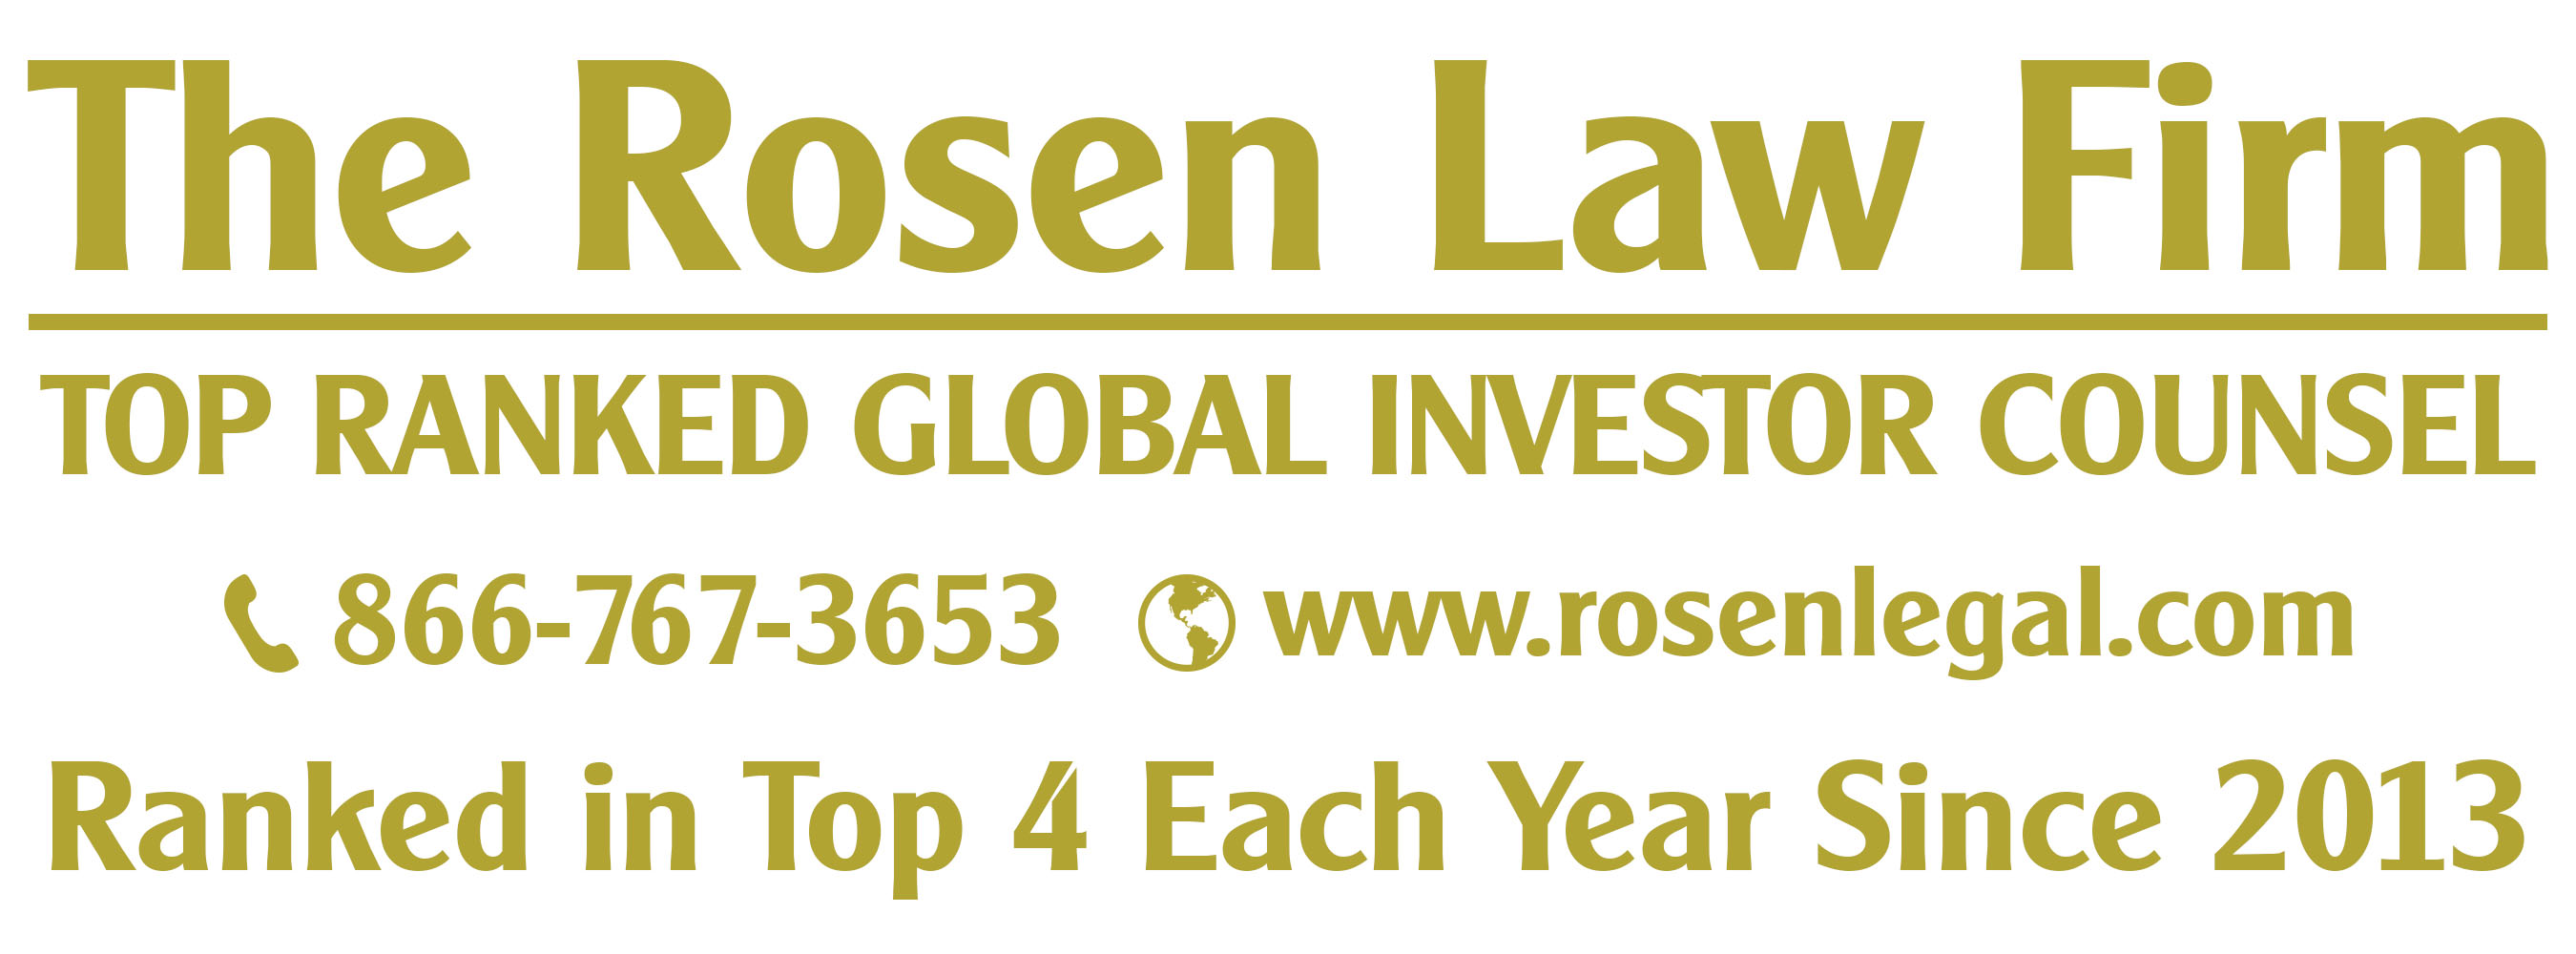 The Rosen Law Firm PA, Sunday, September 4, 2022, Press release picture